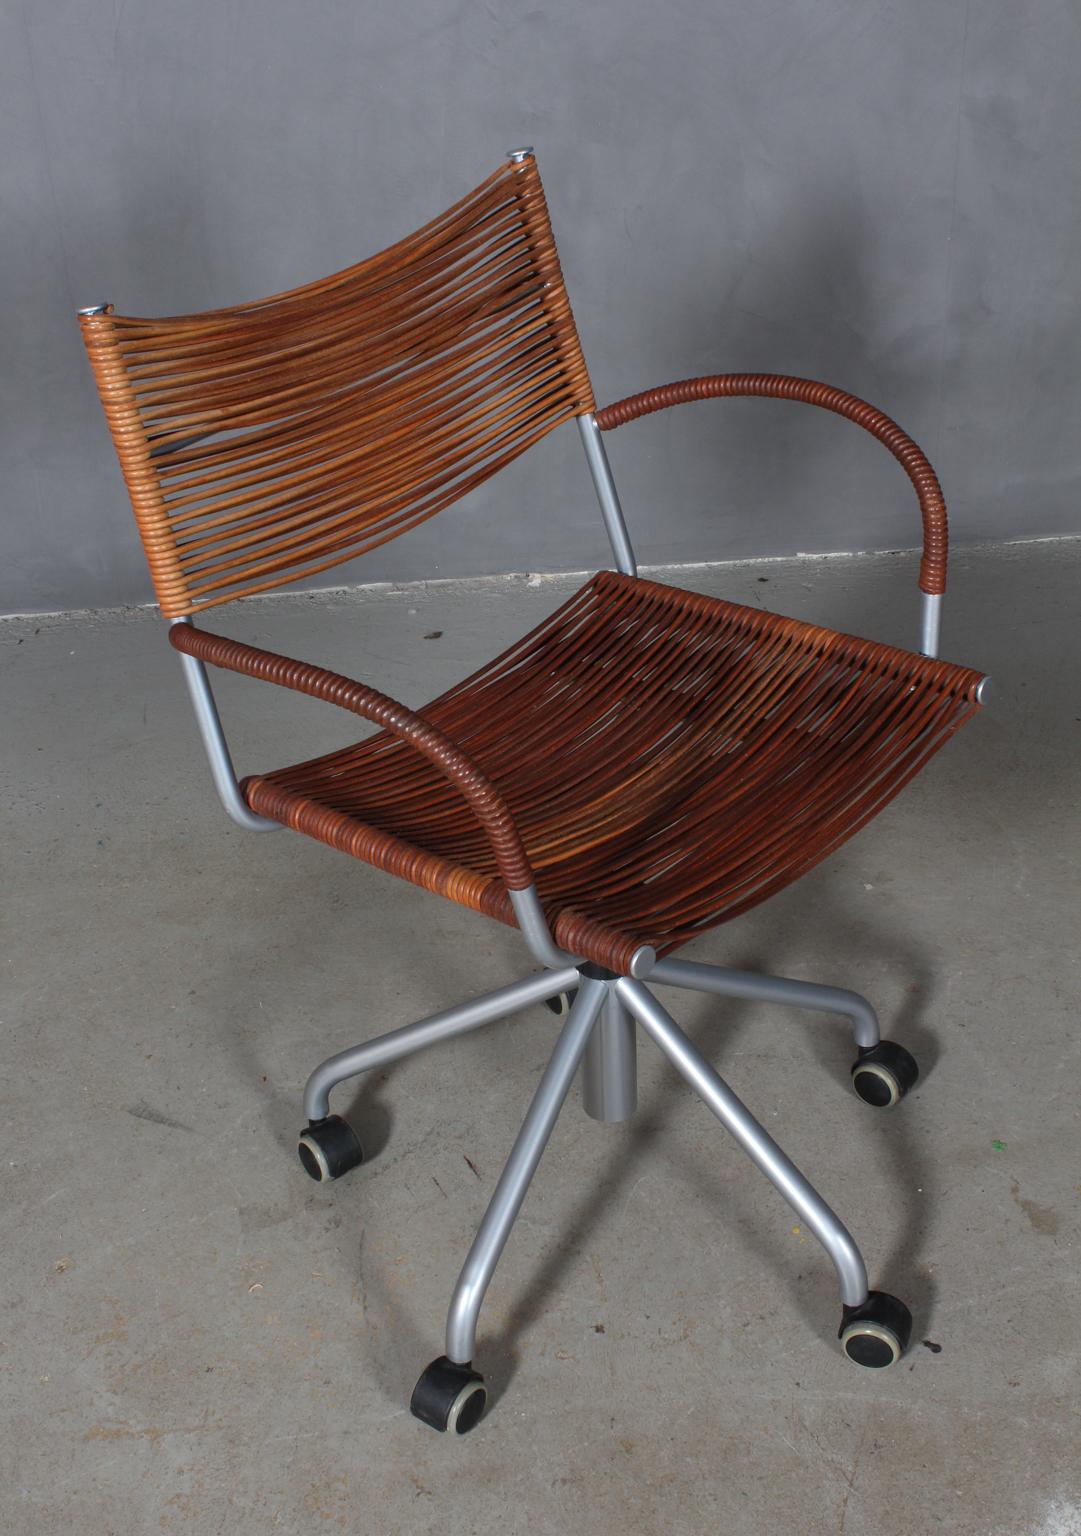 Vintage Tito Agnoli office chair with armrest and height adjustable.

Seat and back in leather cord.

Made for Pierantonio.